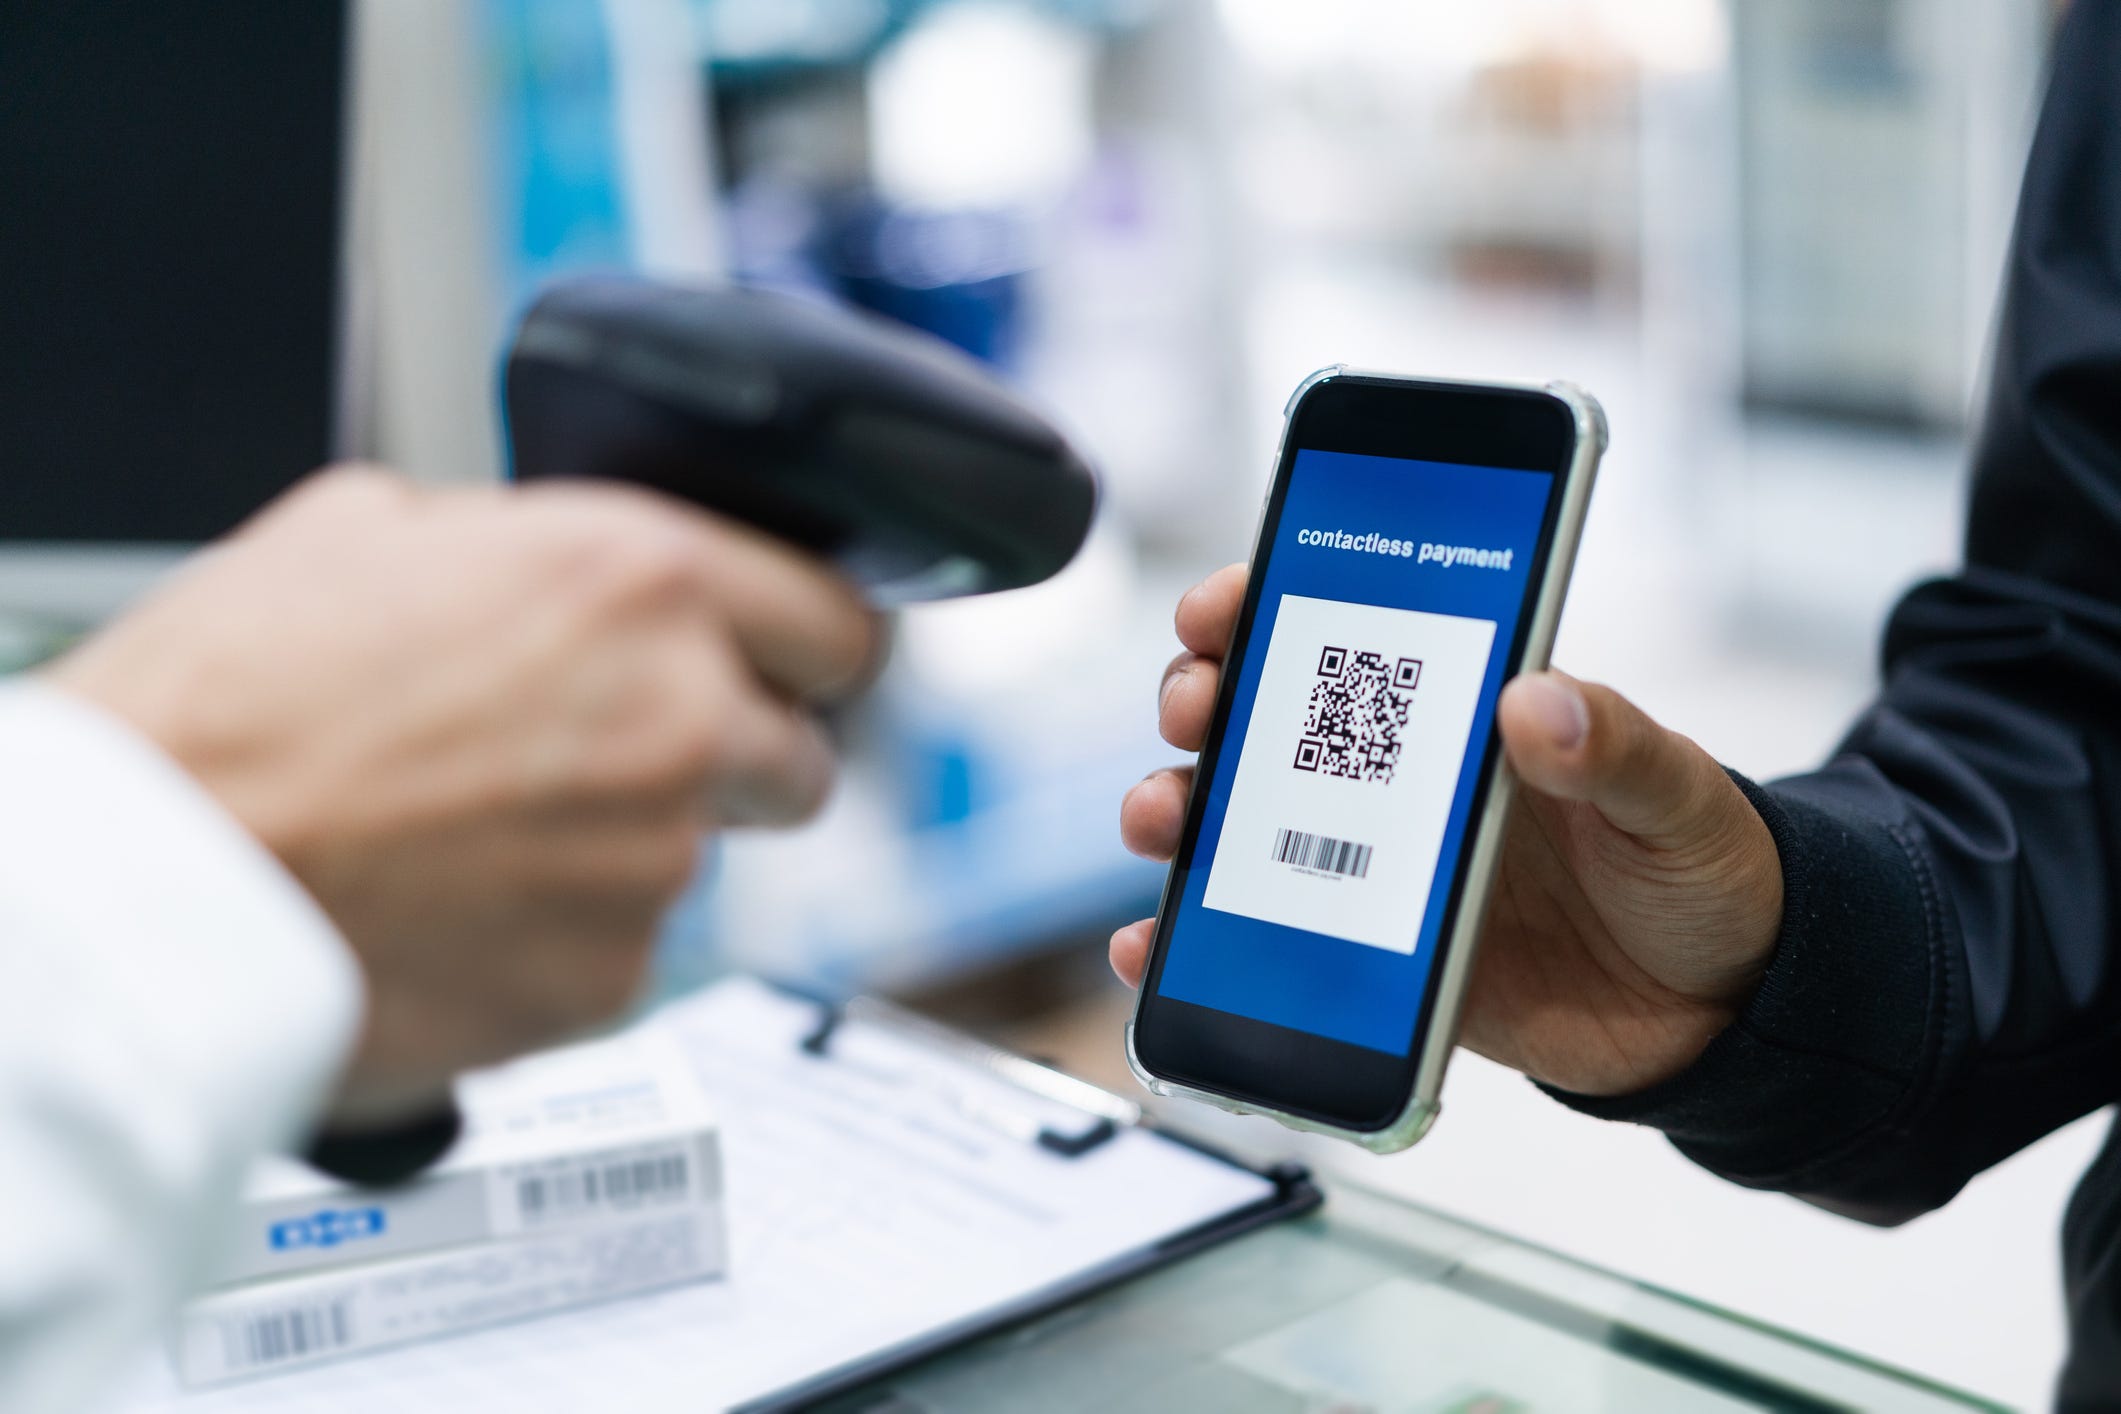 Contactless payment with QR Code